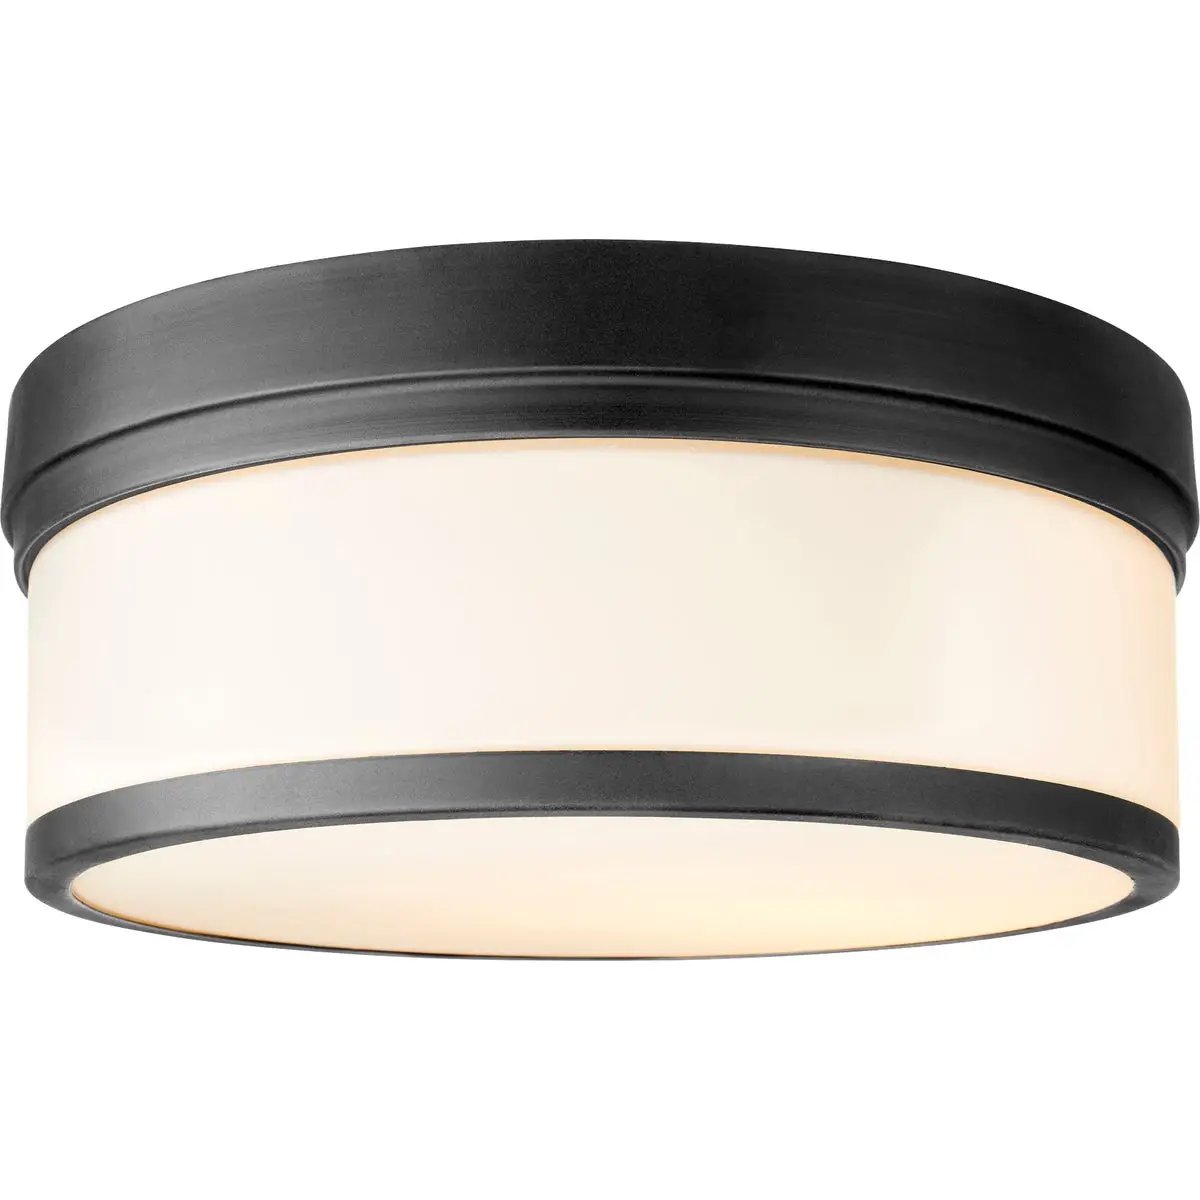 A modern flush mount light fixture with a white shade, adding futuristic luxury to any space. Brand: Quorum International. Wattage: 60W. Input Voltage: 120V. Bulbs: 3 (not included). Bulb Base Type: Medium E26. Dimmable: Yes. Certifications: UL Listed. Safety Rating: Damp Location. Finish options: Aged Brass, Aged Silver Leaf, Noir, Oiled Bronze, Polished Nickel, Satin Nickel, Zinc. Dimensions: 14"W x 5.5"H. Warranty: 2 Years.